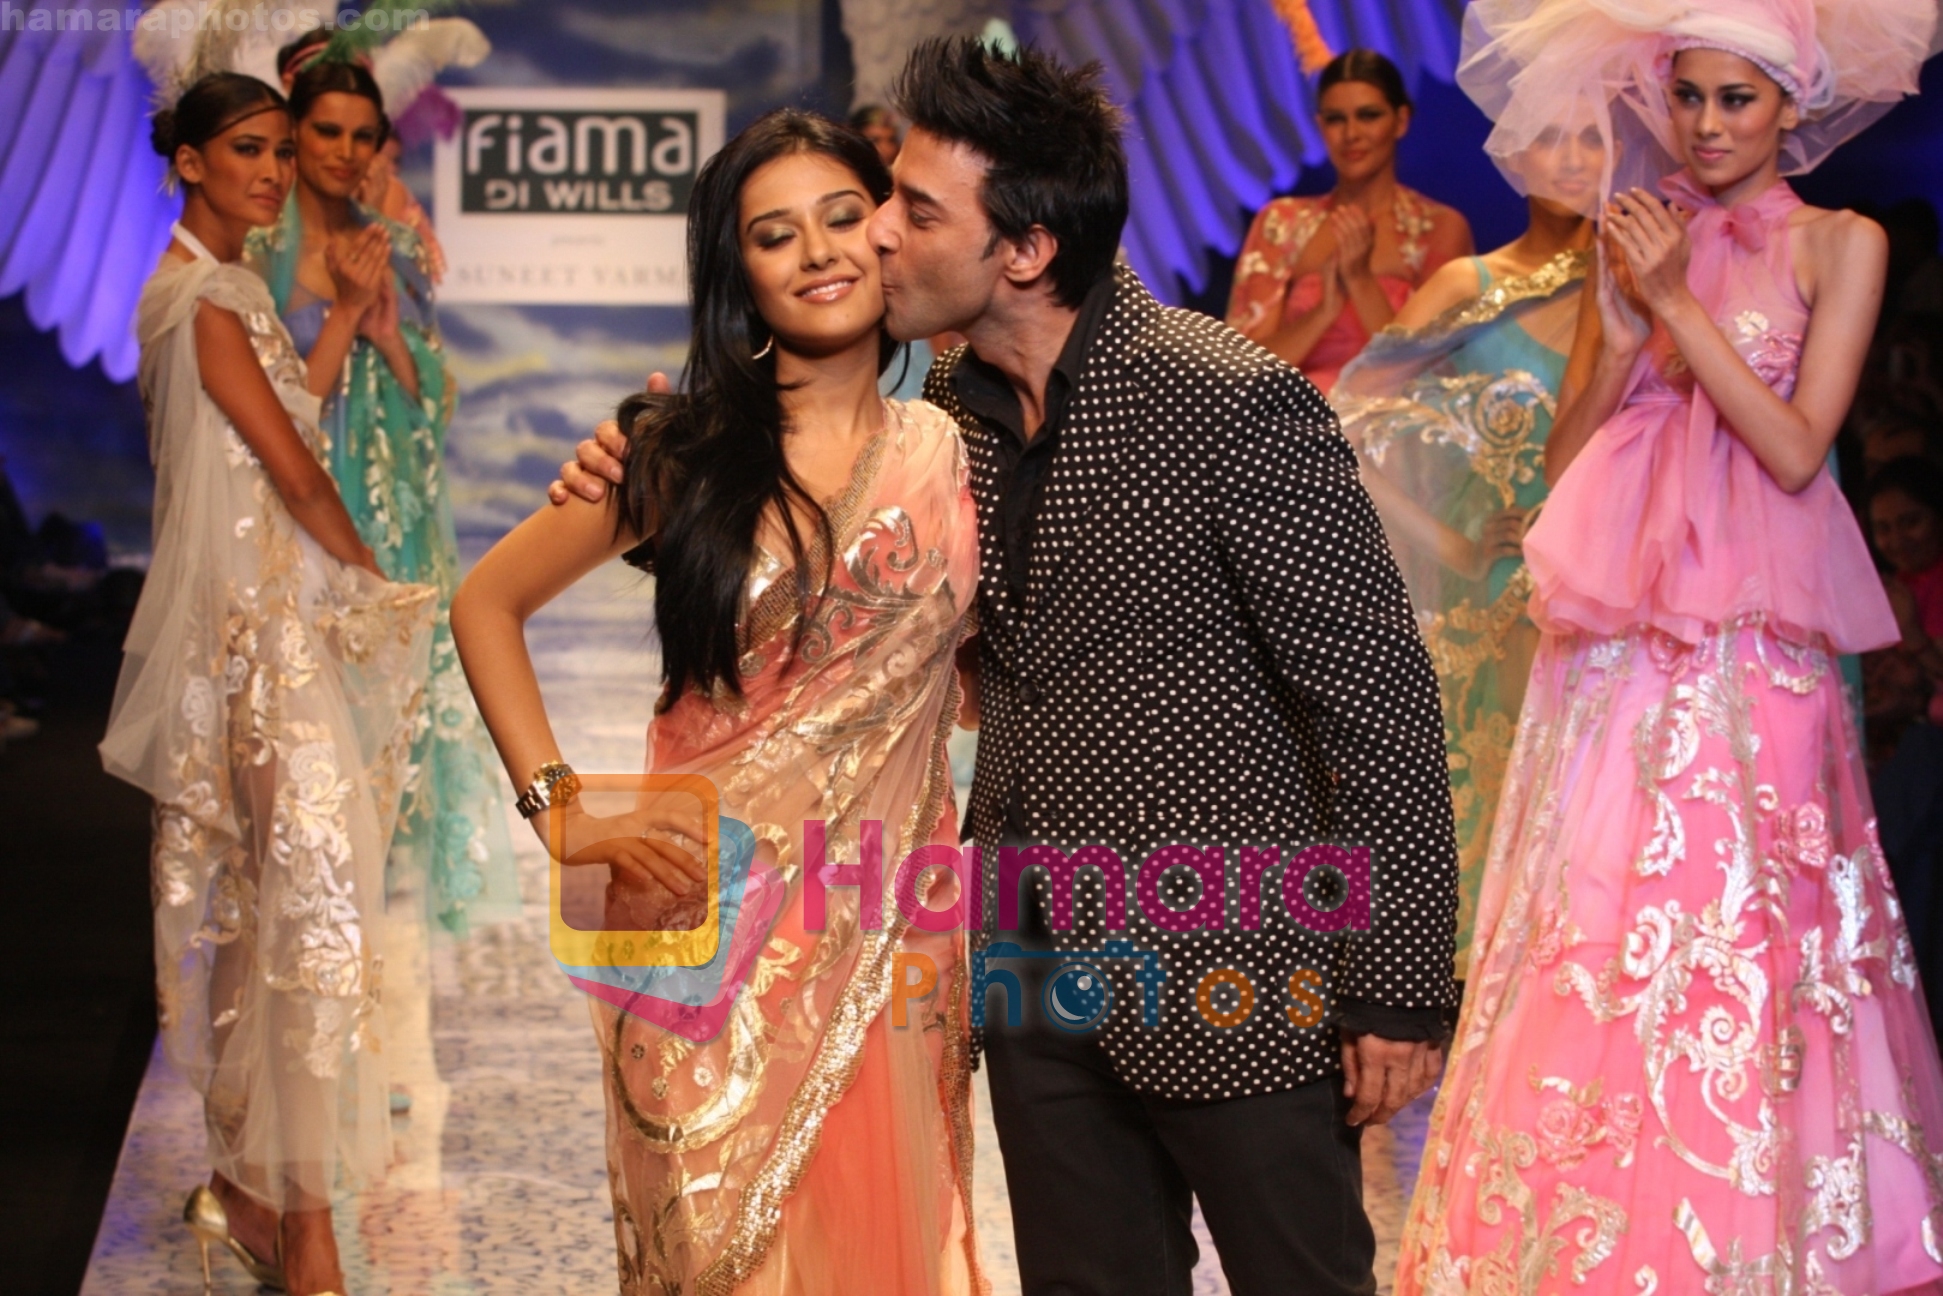 Amrita Rao along with designer Suneet Verma at the Fiama Di Wills show at WIFW on 27th Oct 2009